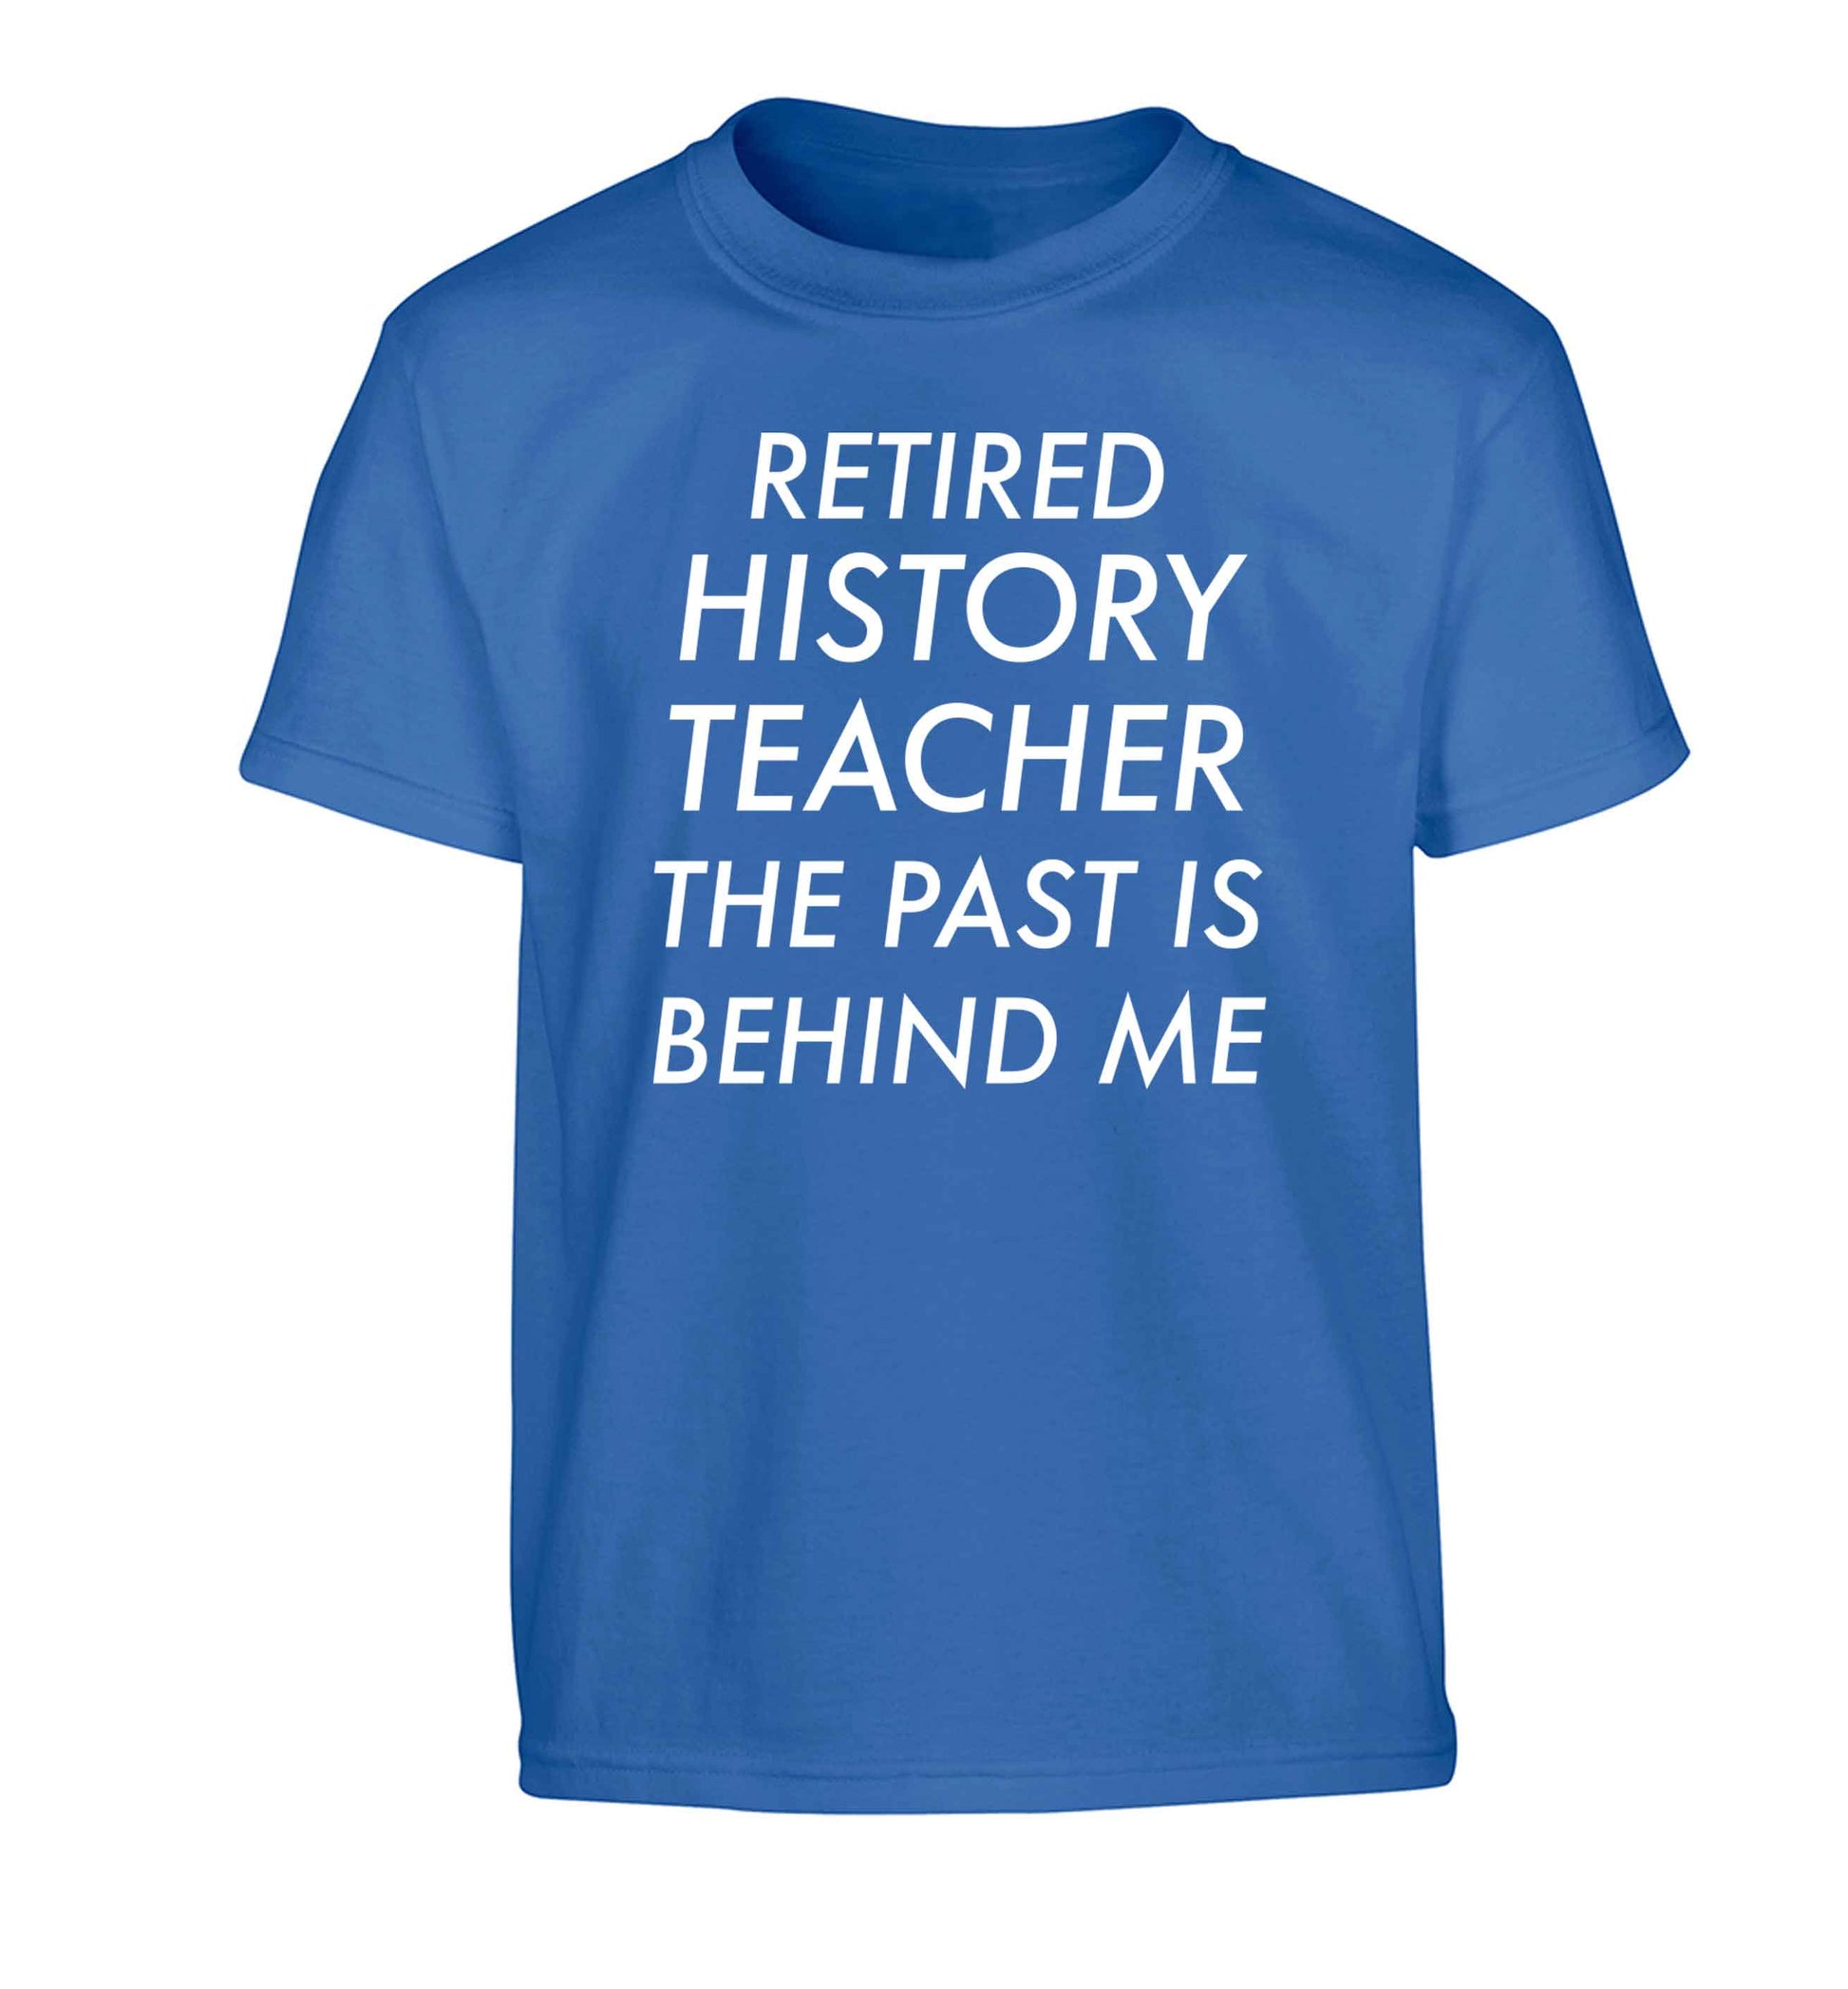 Retired history teacher the past is behind me Children's blue Tshirt 12-13 Years